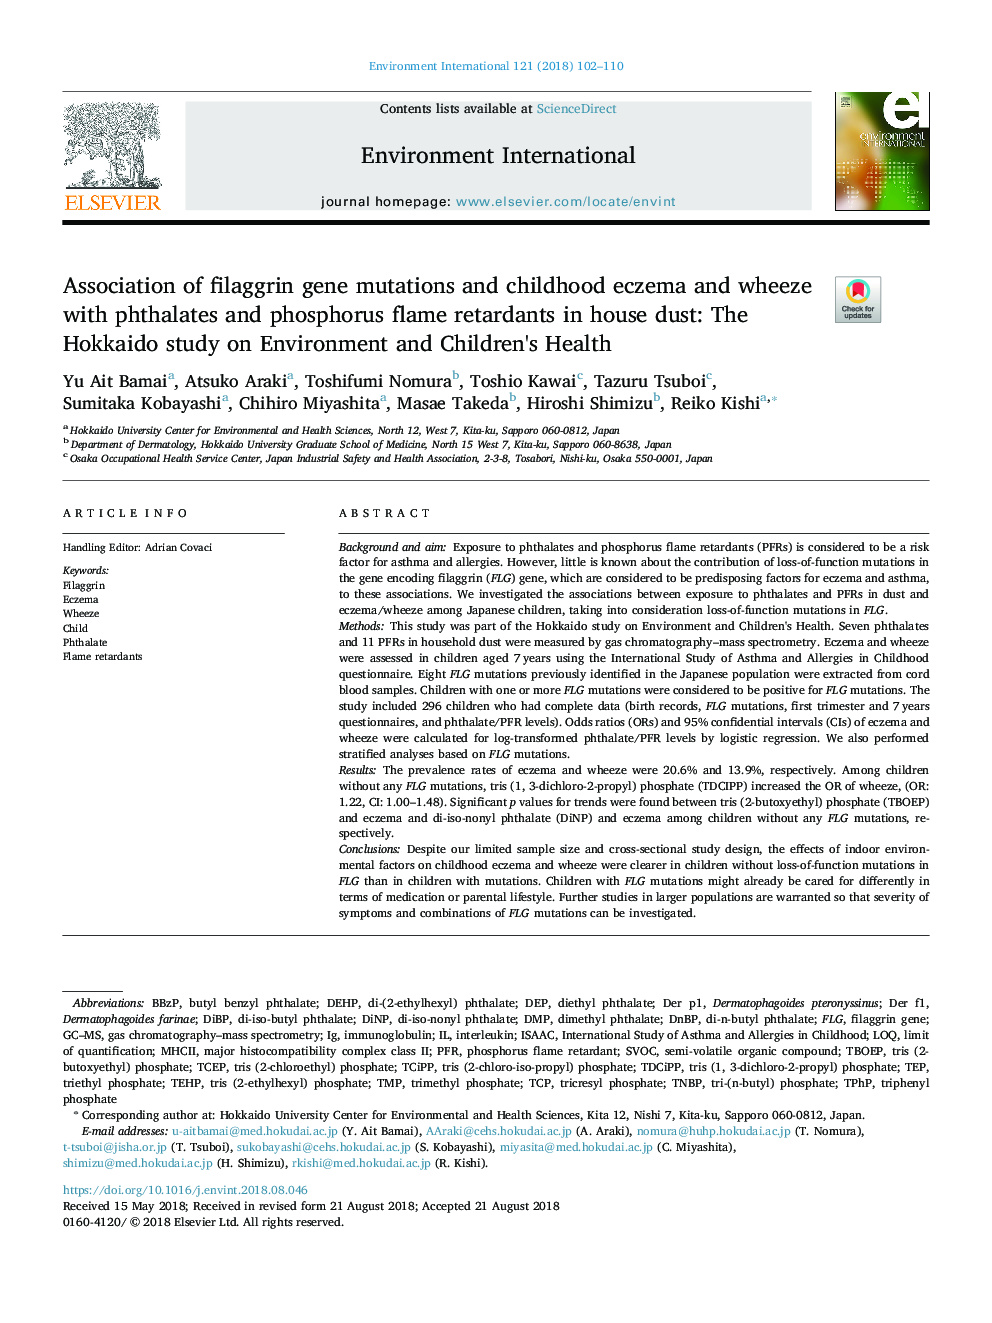 Association of filaggrin gene mutations and childhood eczema and wheeze with phthalates and phosphorus flame retardants in house dust: The Hokkaido study on Environment and Children's Health